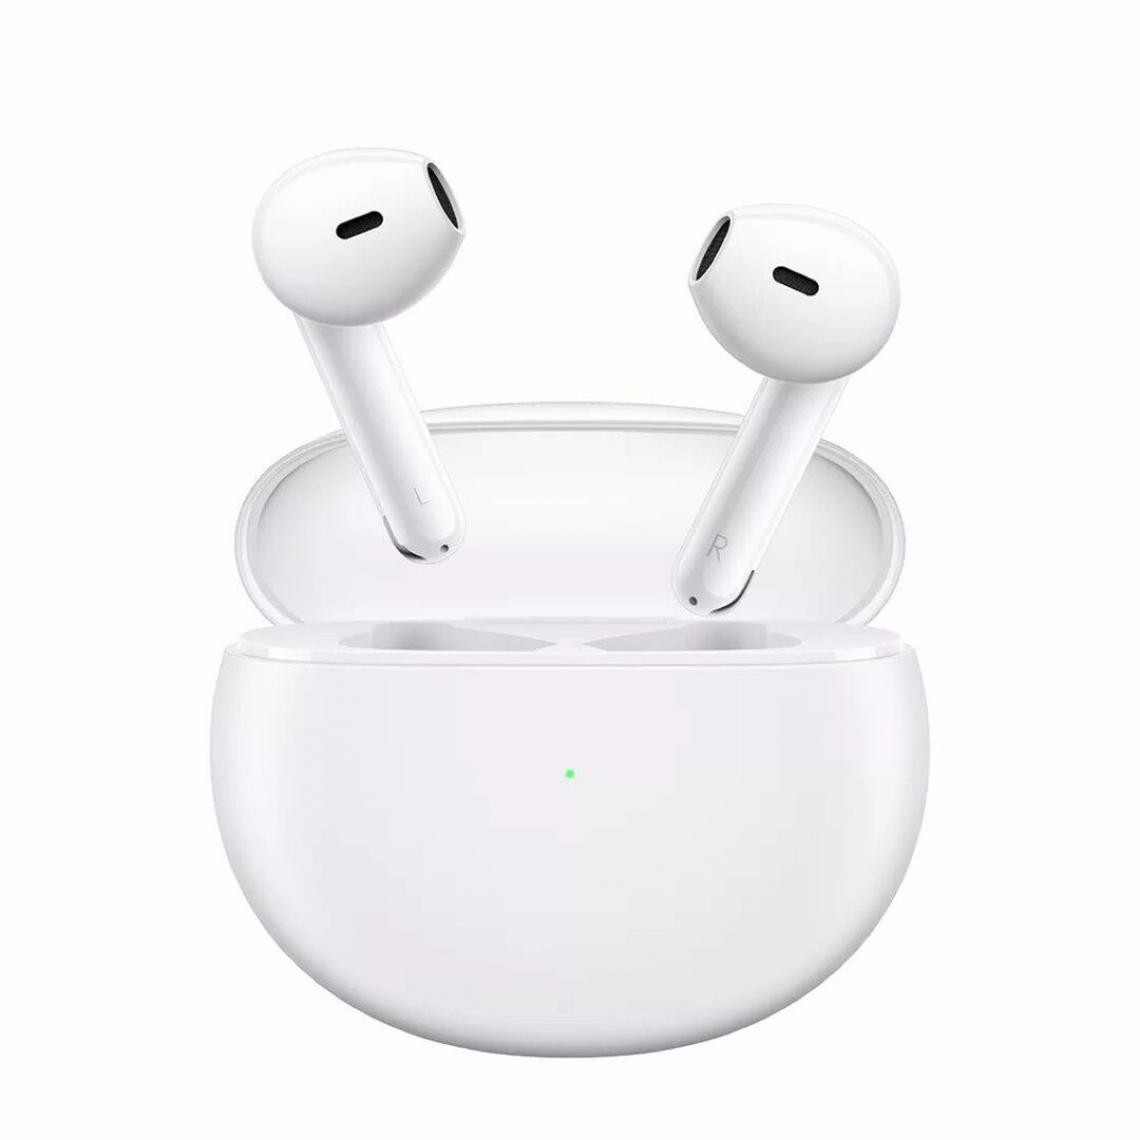 Oppo - Enco AIR - Ecouteur Bluetooth - Blanc - Ecouteurs intra-auriculaires